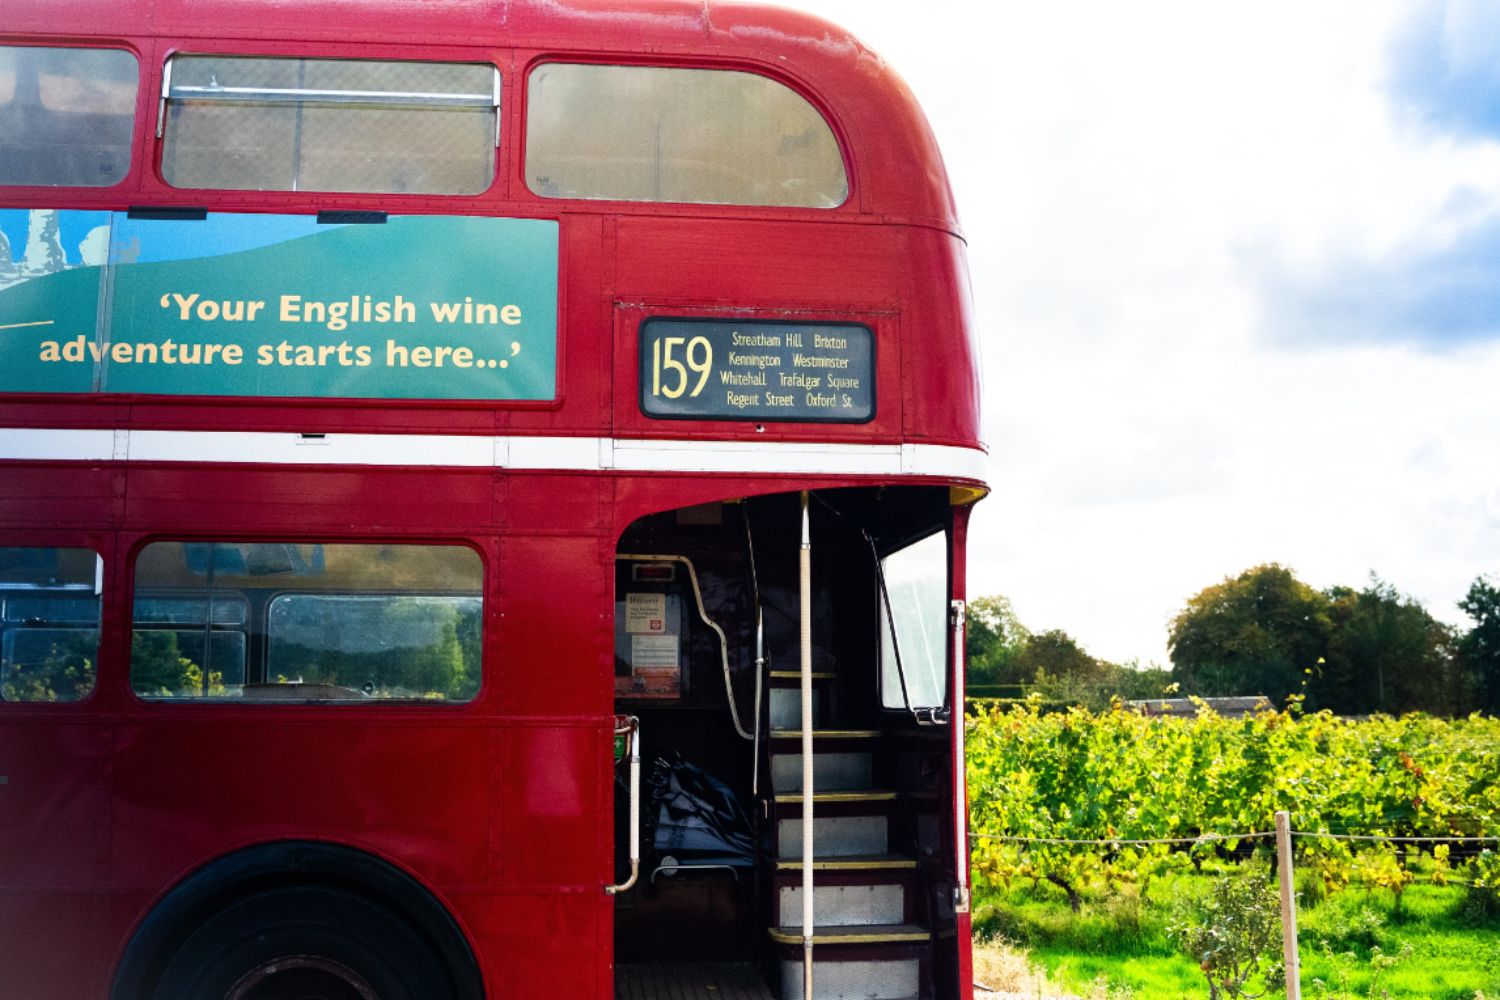 WIN! 2 tickets to a vineyard hopping experience with Great British Wine Tours – worth £250!